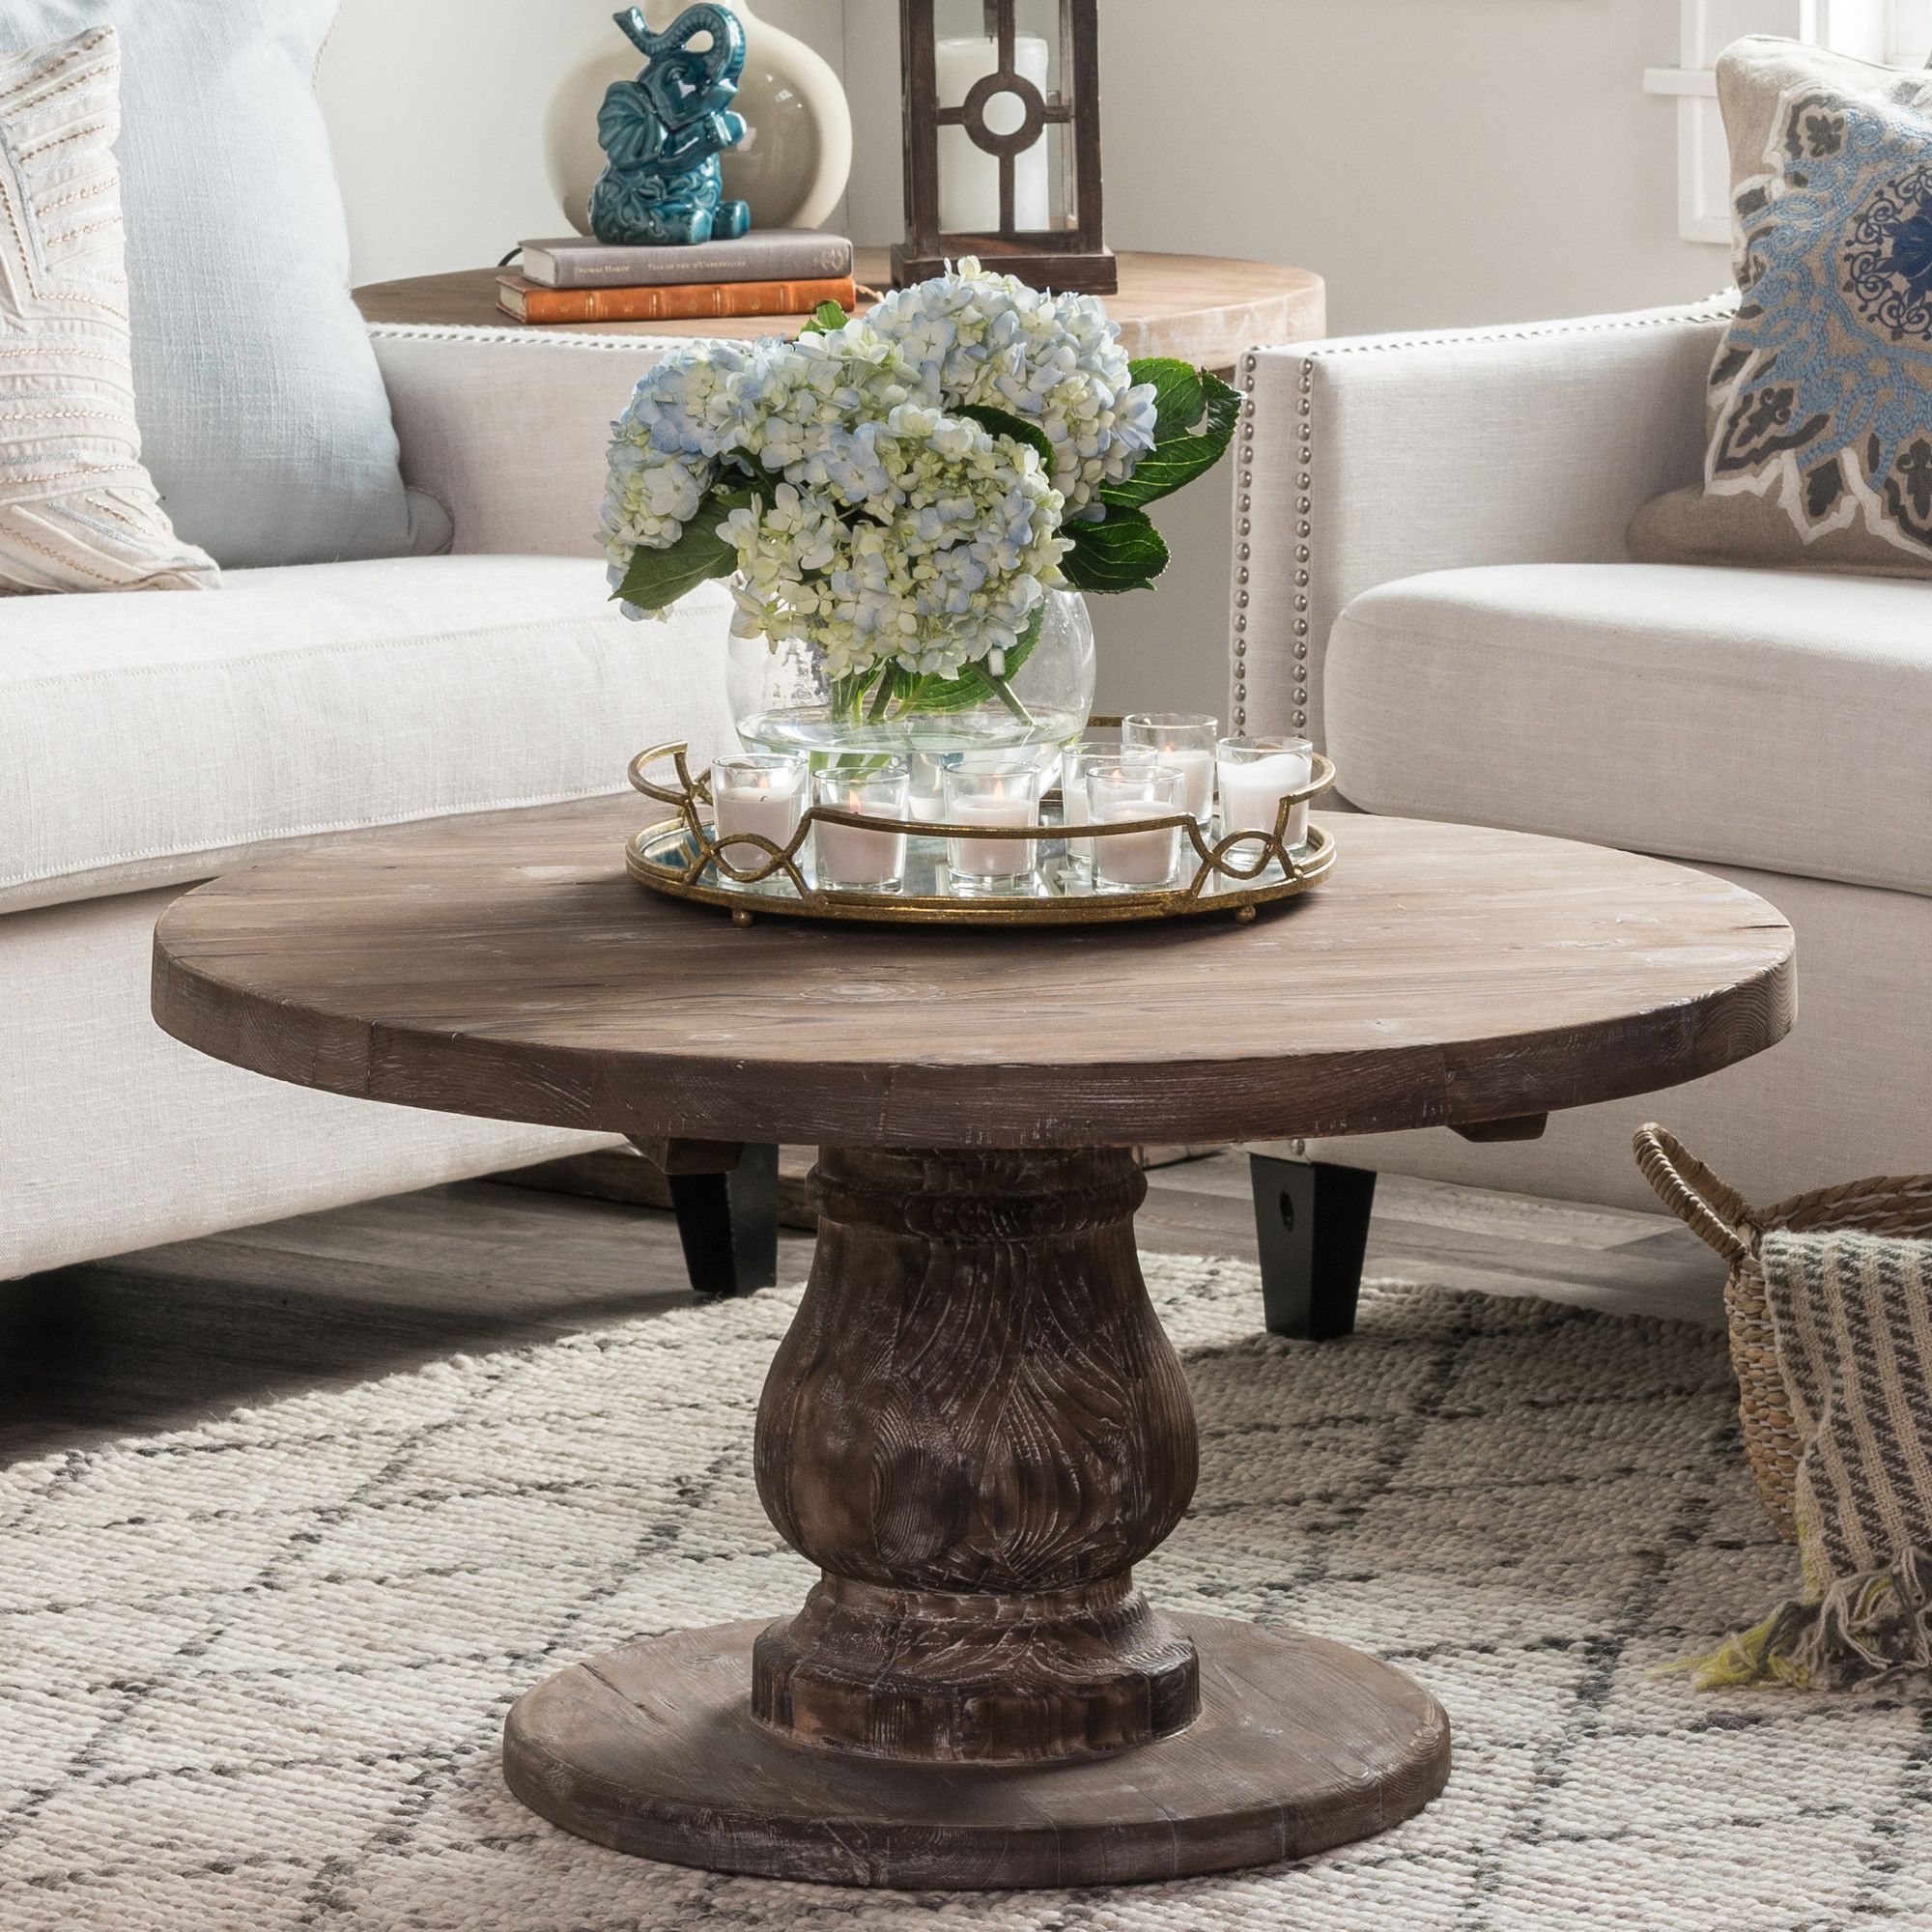 Bengie Coffee Table Pedestal Coffee Table, Round Glass Coffee Table Throughout American Heritage Round Coffee Tables (View 20 of 20)